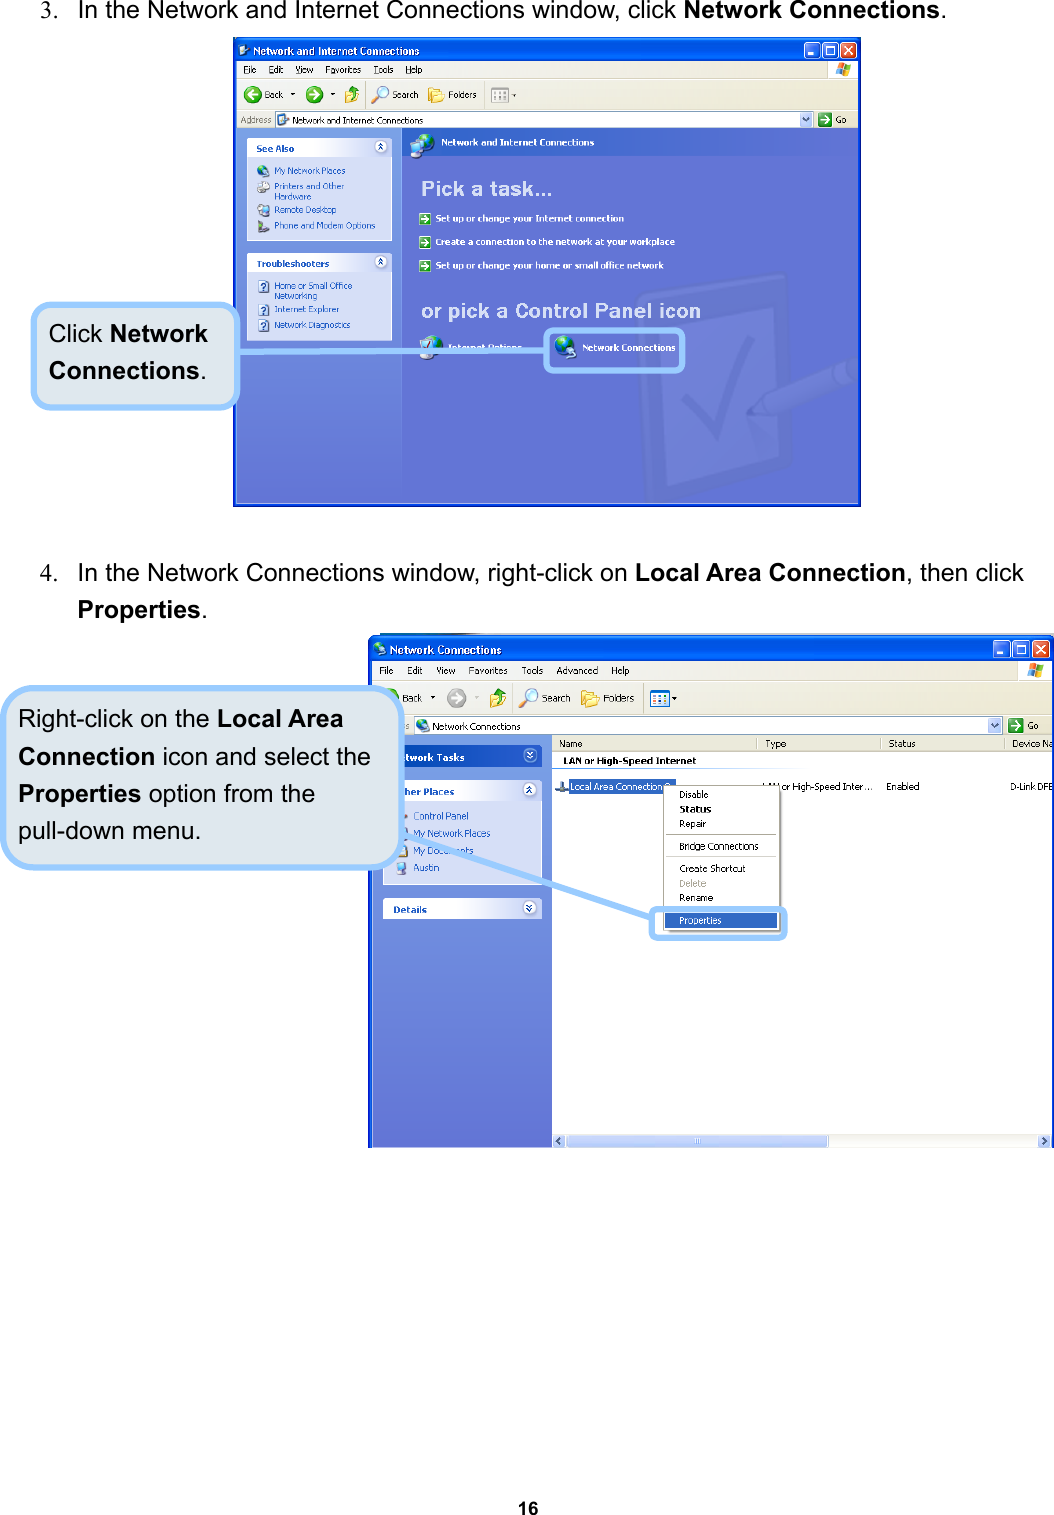  163.  In the Network and Internet Connections window, click Network Connections.   4.  In the Network Connections window, right-click on Local Area Connection, then click Properties.           Right-click on the Local Area Connection icon and select the Properties option from the pull-down menu. Click Network Connections. 